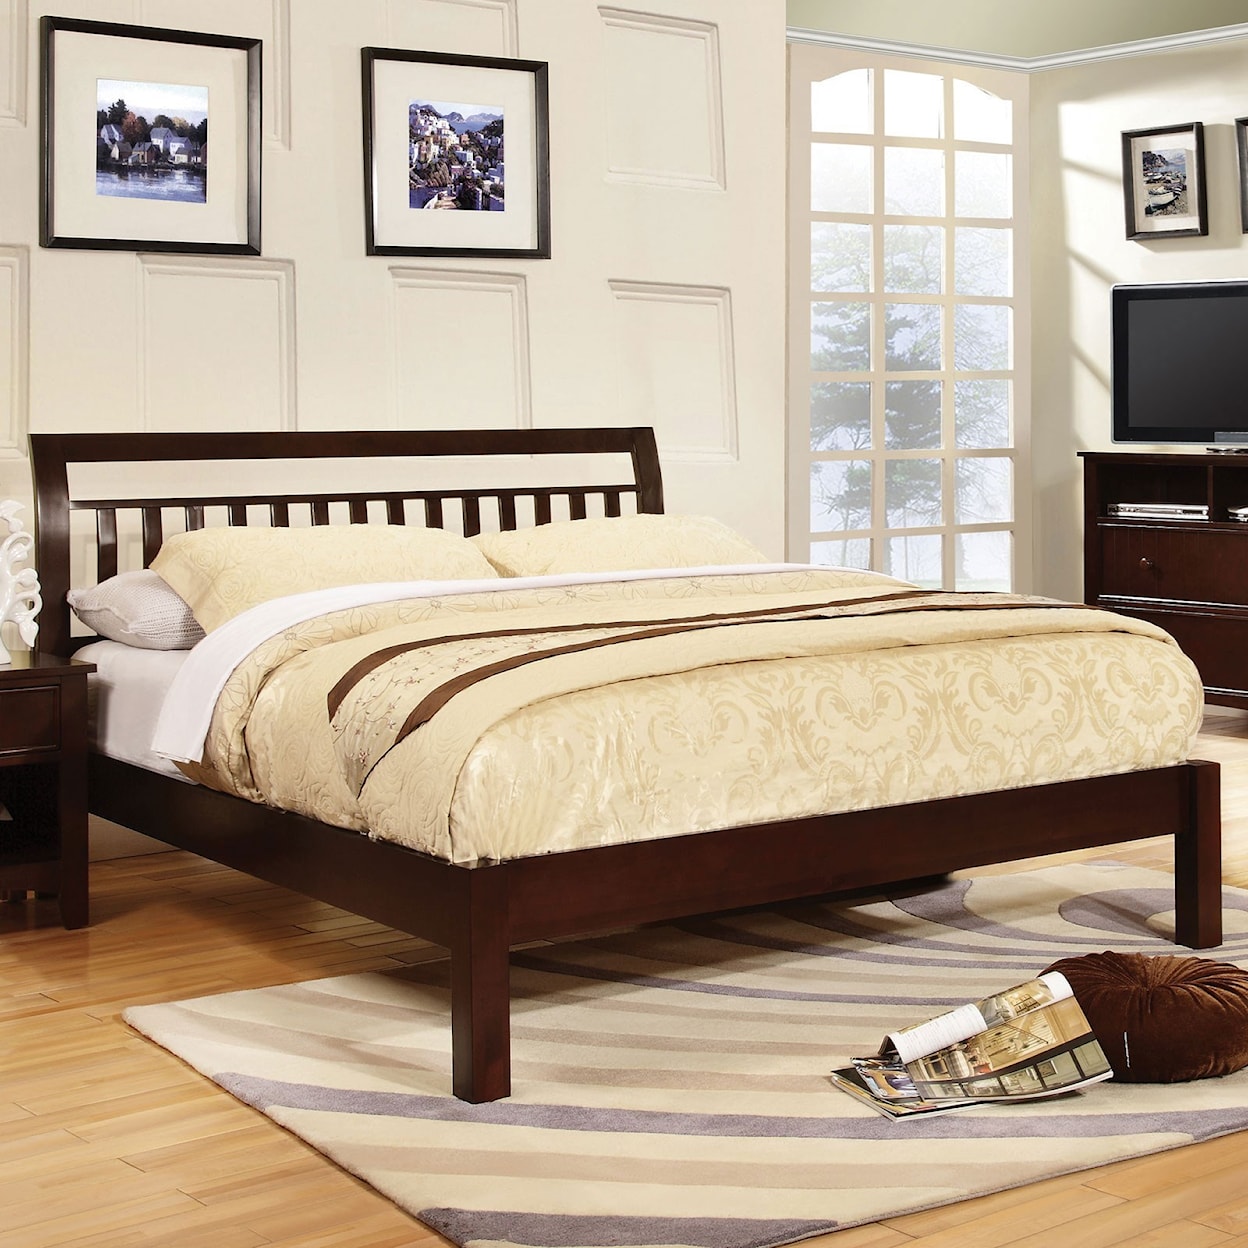 Furniture of America Corry King Sleigh Bed